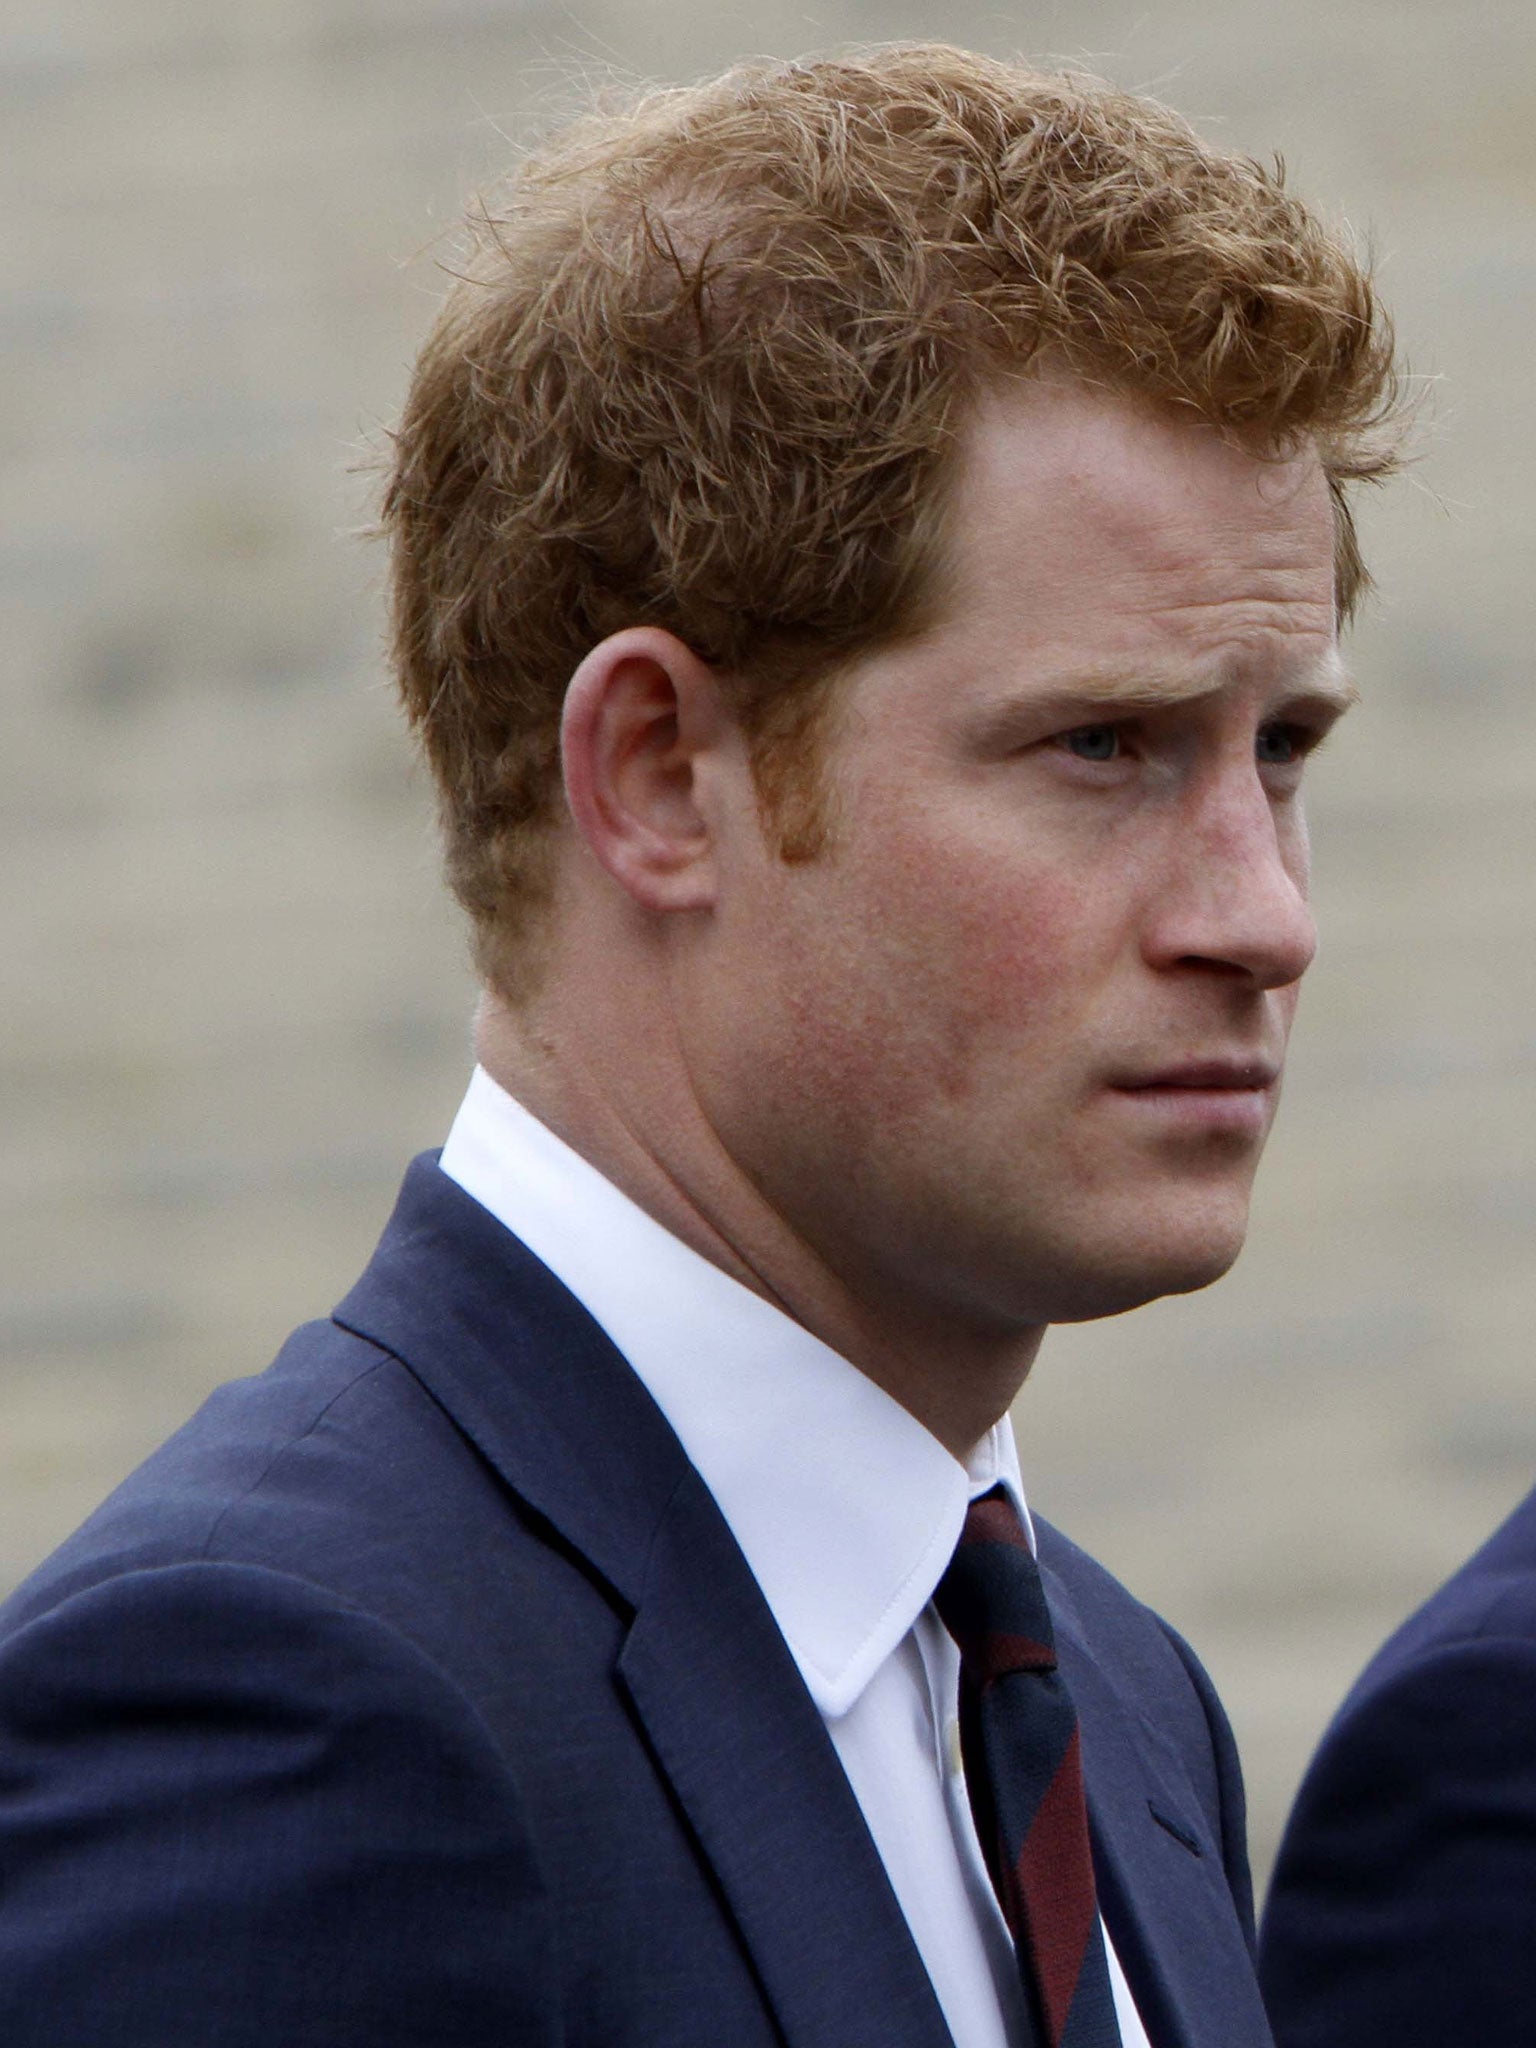 A man has pleaded guilty to threatening to kill Prince Harry, police confirmed